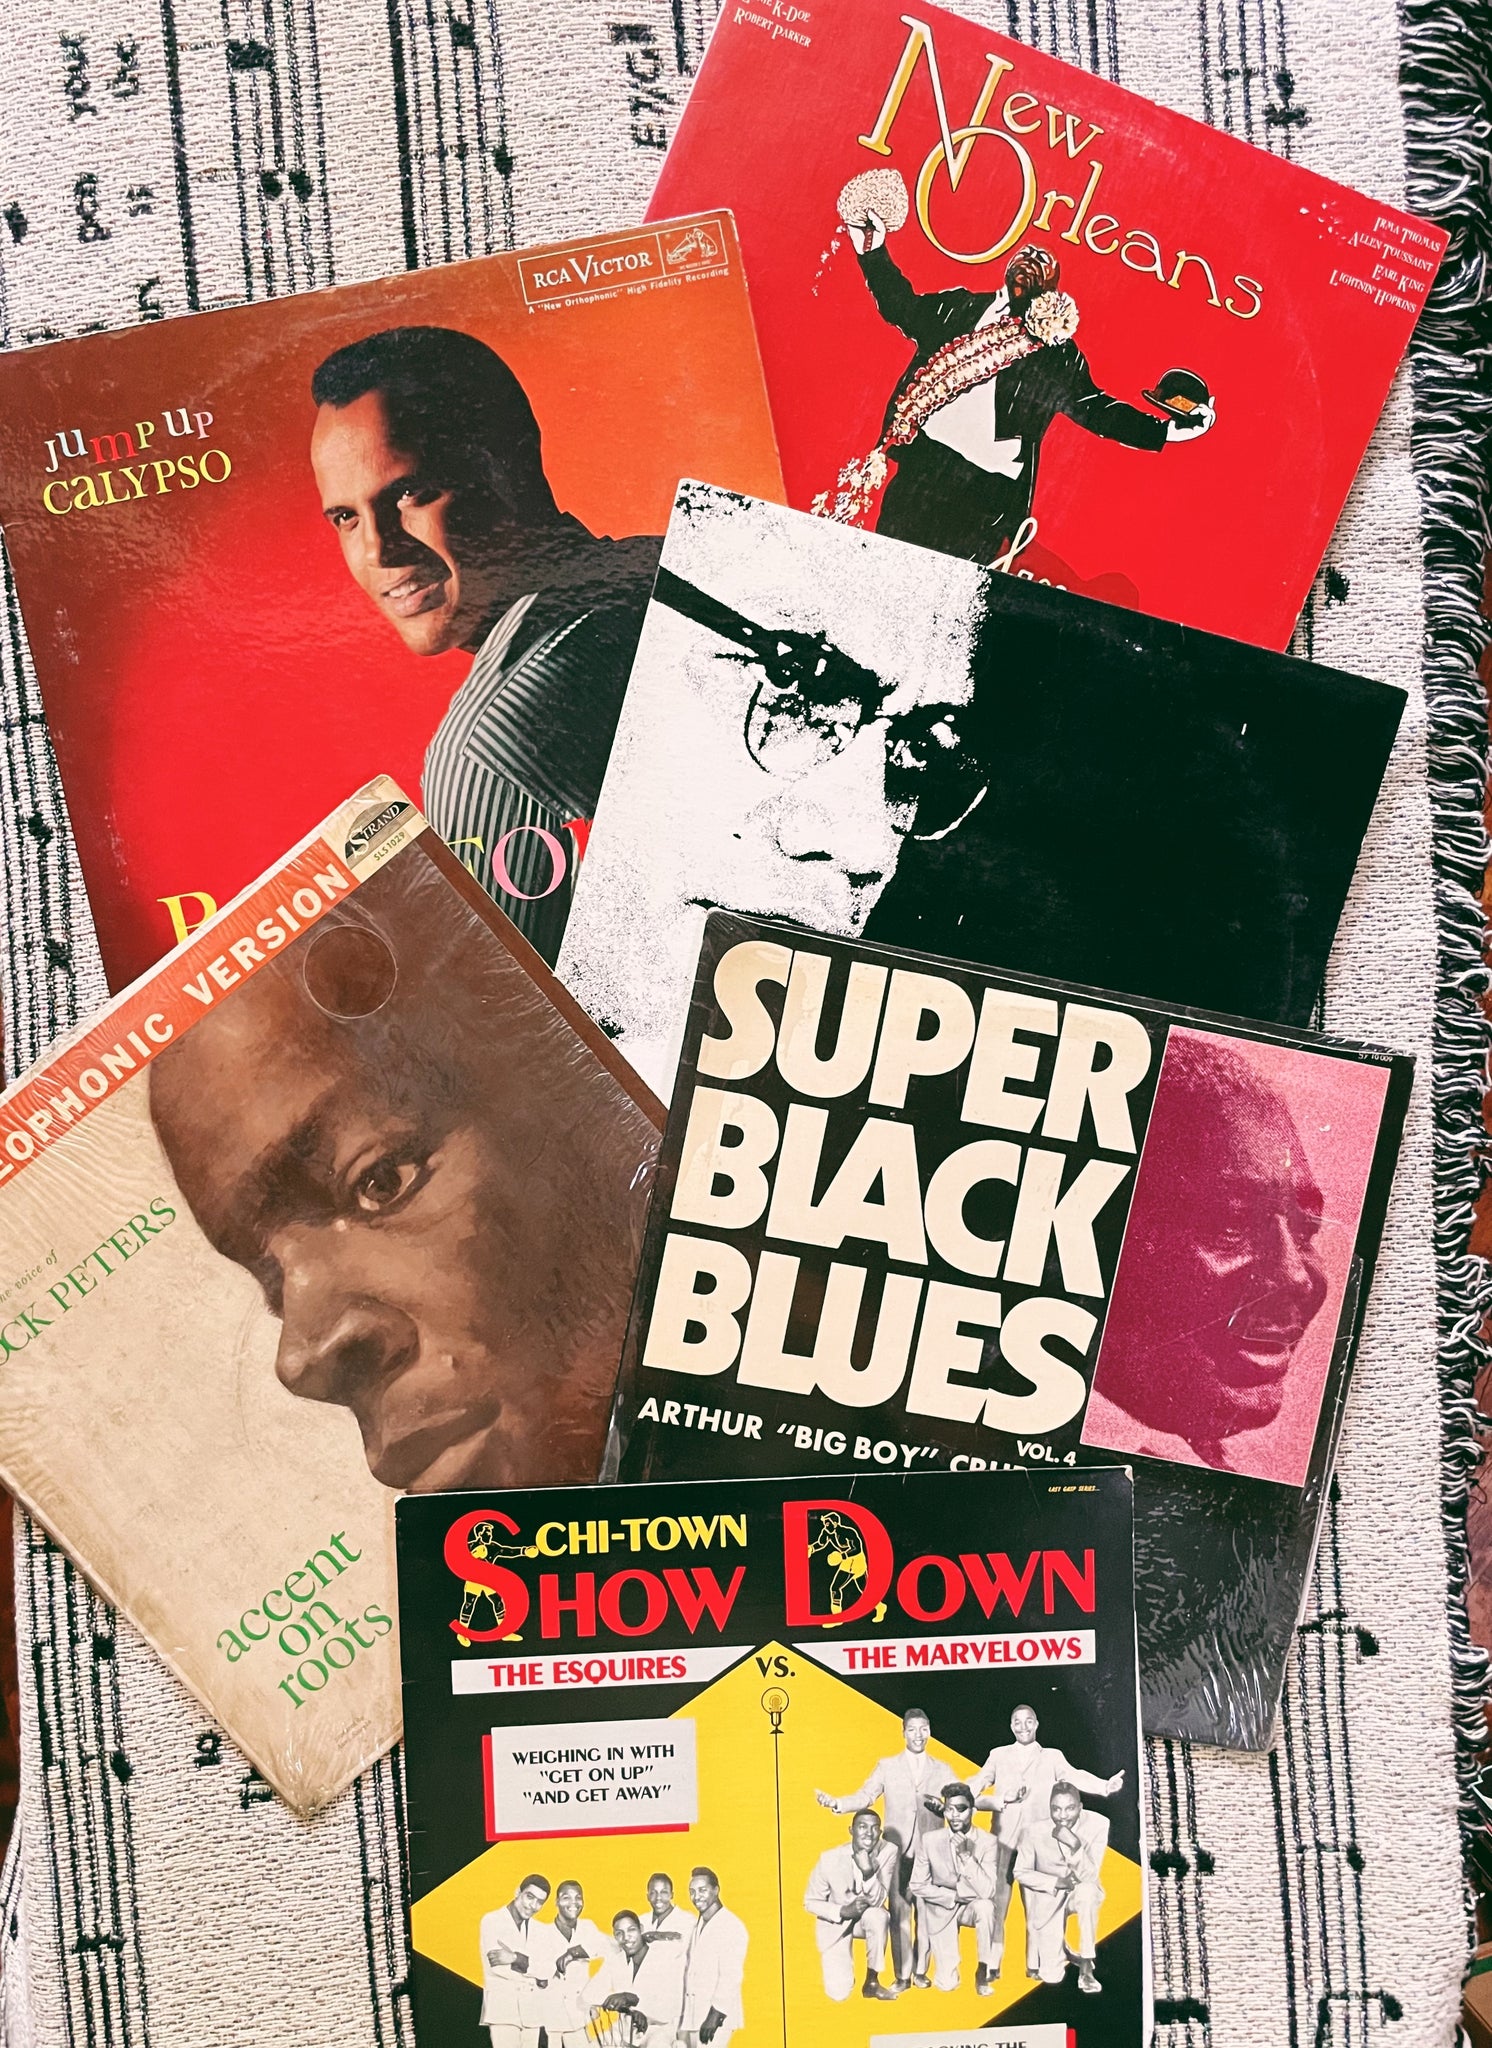 Vintage Assorted Vinyl Records (Please Select)